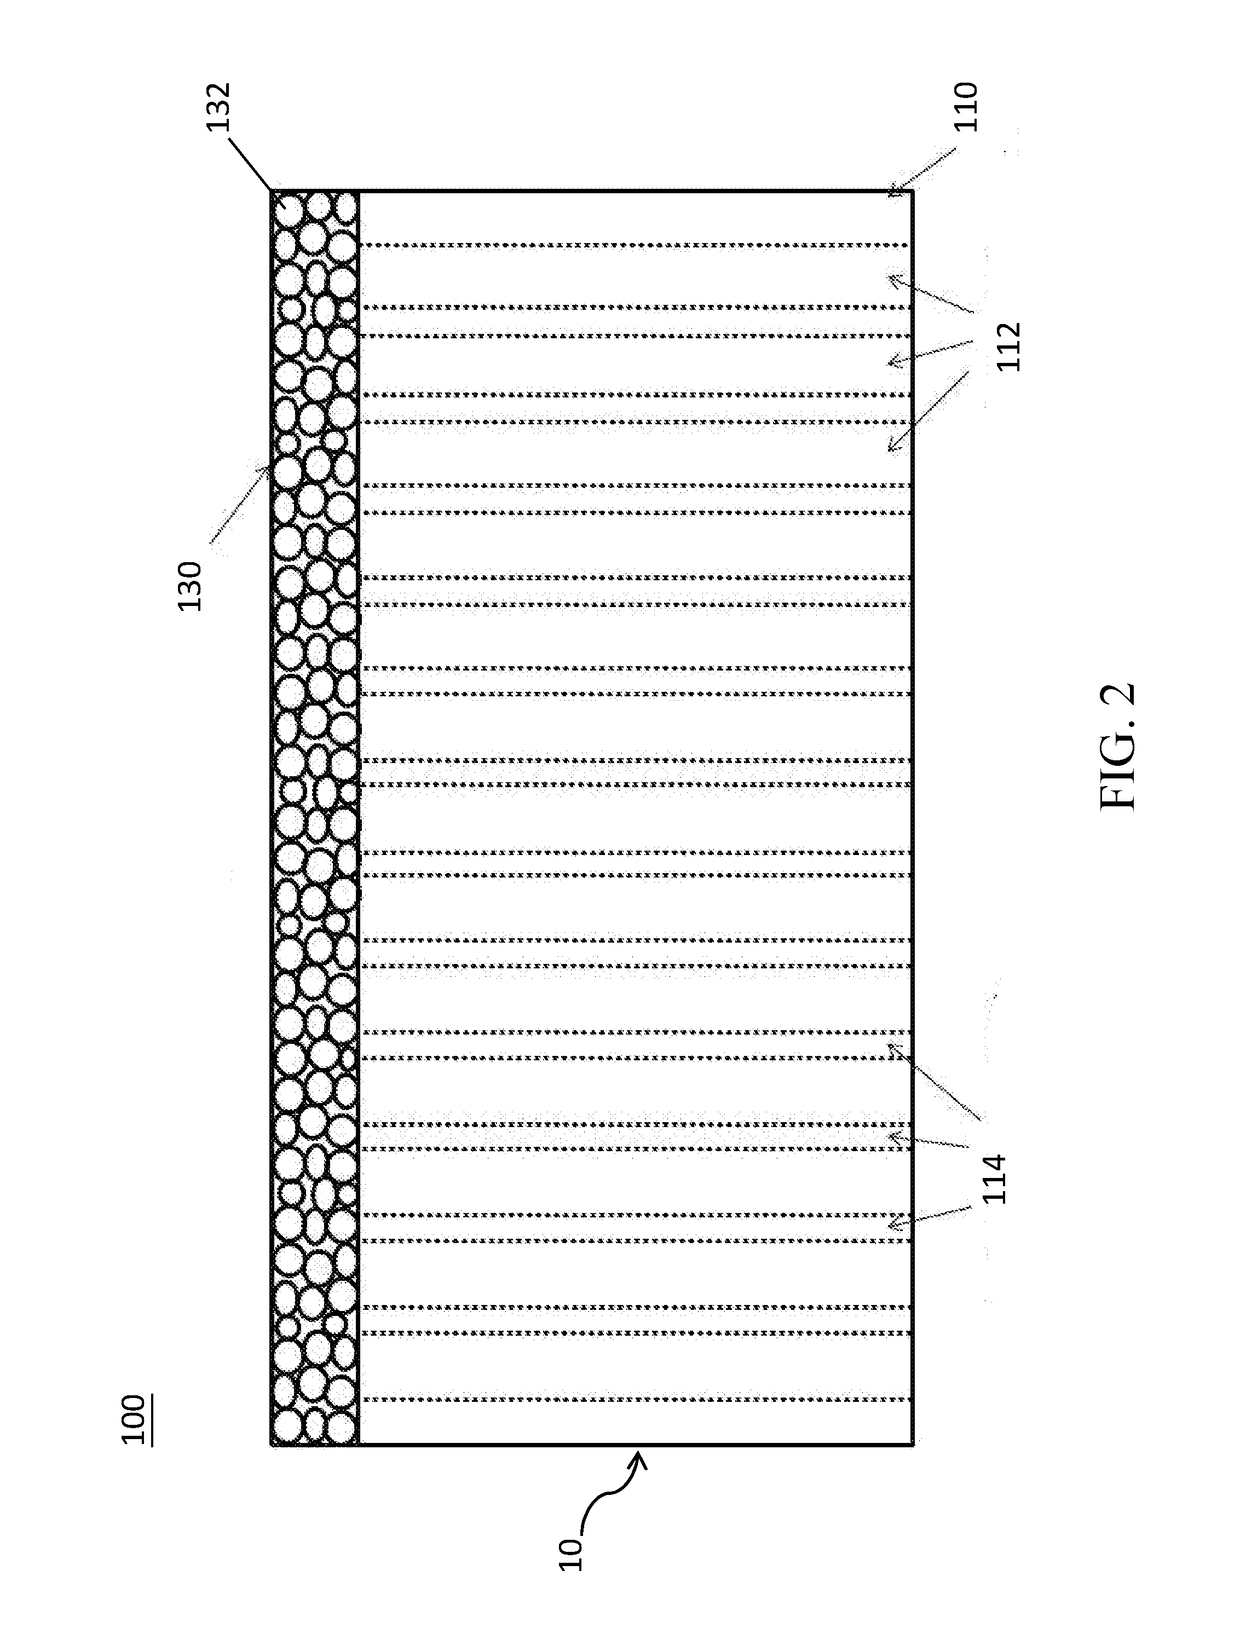 Permeable metal substrate, metal-supported solid oxide fuel cell and their manufacturing methods